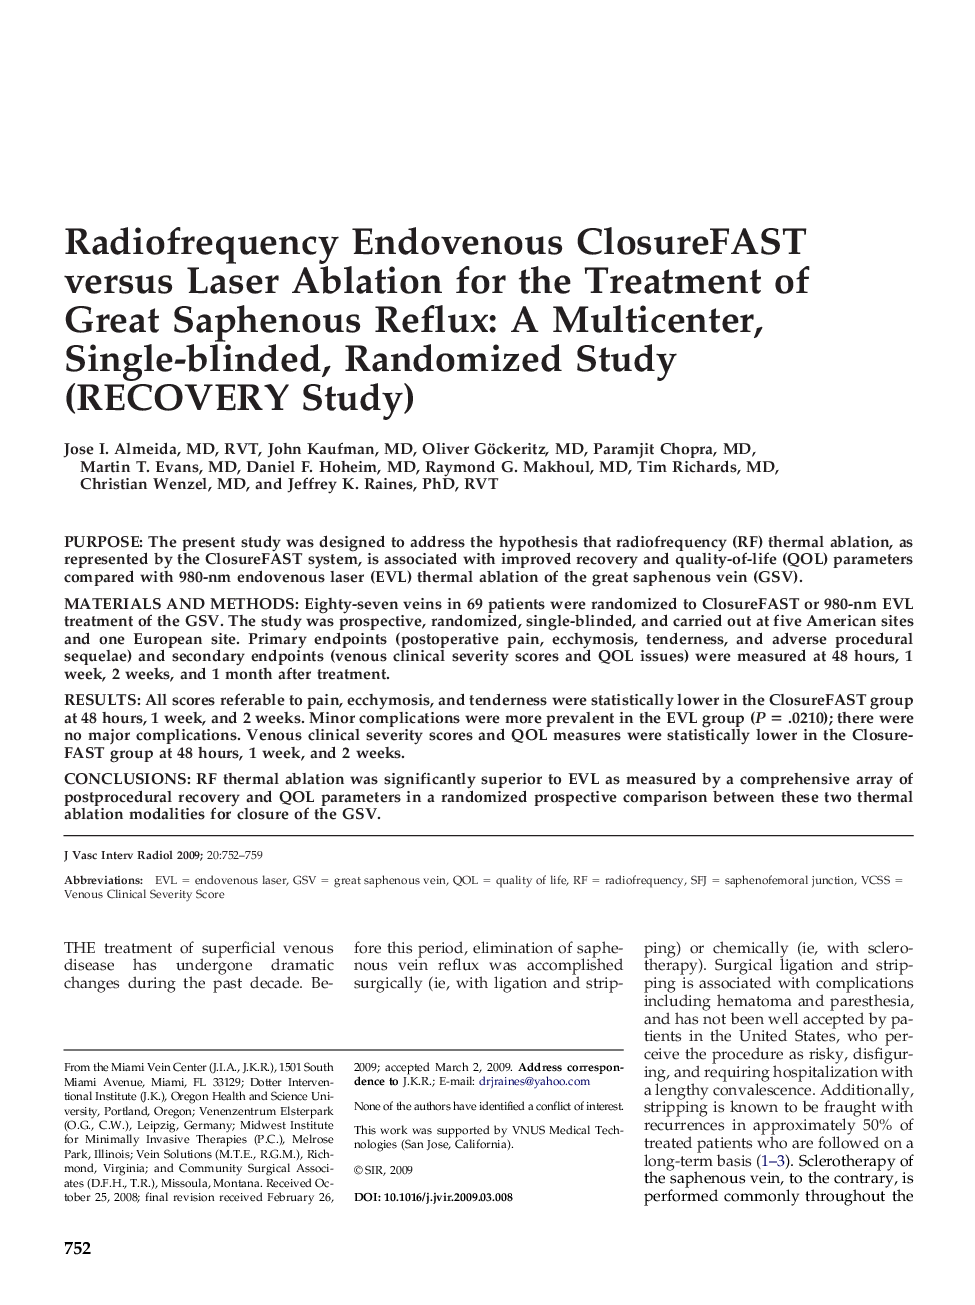 Radiofrequency Endovenous ClosureFAST versus Laser Ablation for the Treatment of Great Saphenous Reflux: A Multicenter, Single-blinded, Randomized Study (RECOVERY Study)